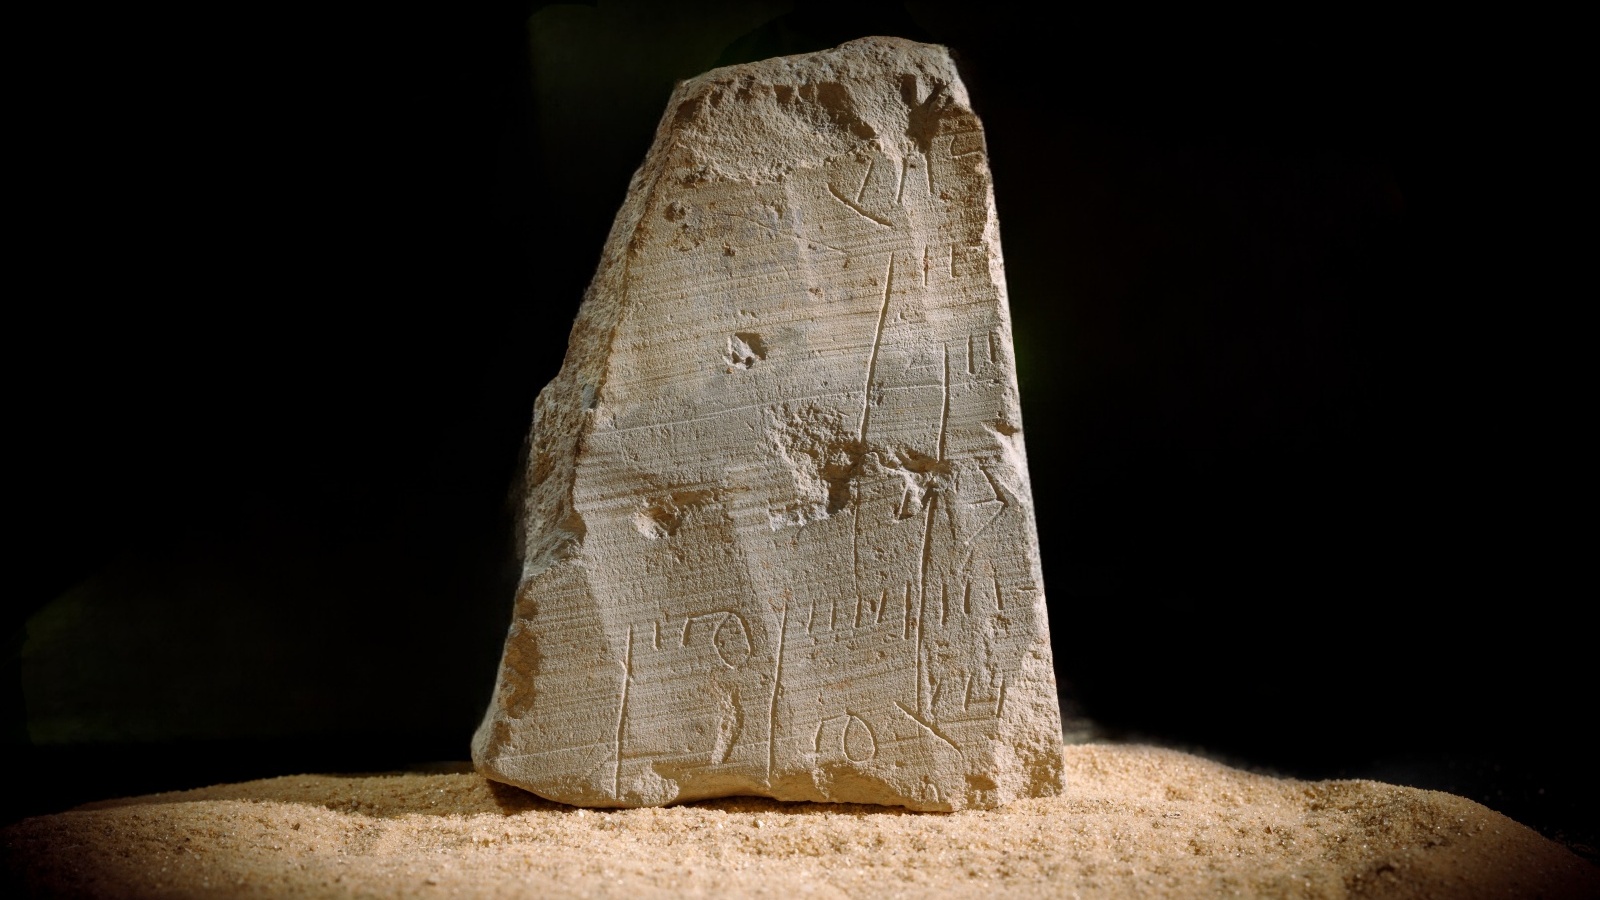 The inscription carrying a 2,000-year-old financial record unearthed in Jerusalem. Photo by Eliyahu Yanai/City of David